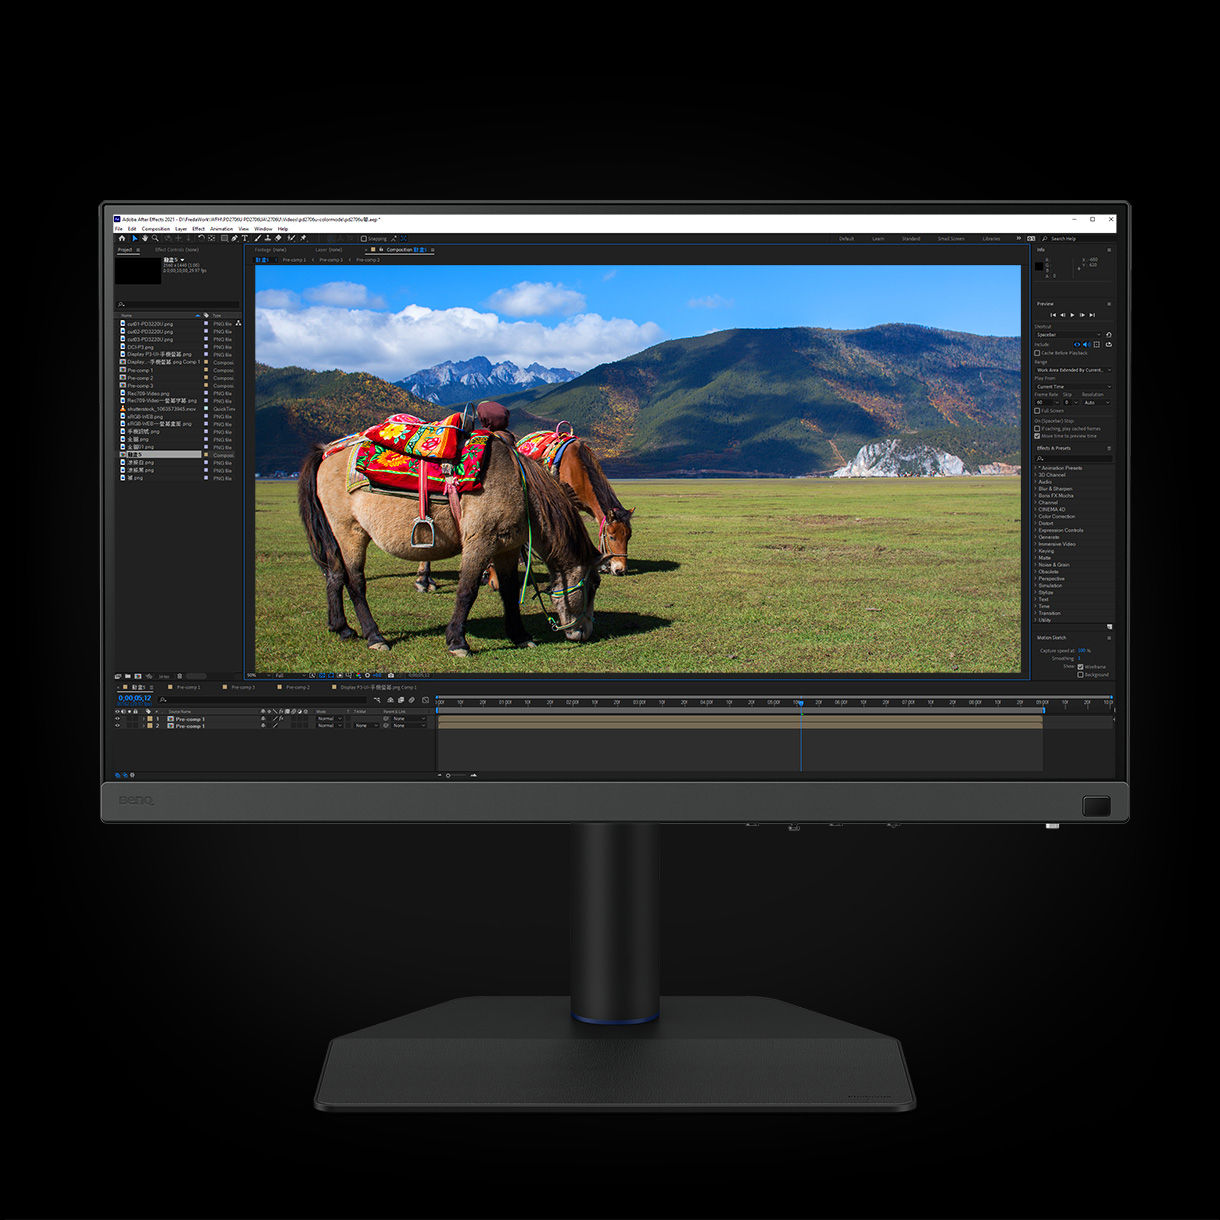 Equipped with P3 Color Space, BenQ SW272Q delivers accurate colors to videos with P3 color space for your video projects.